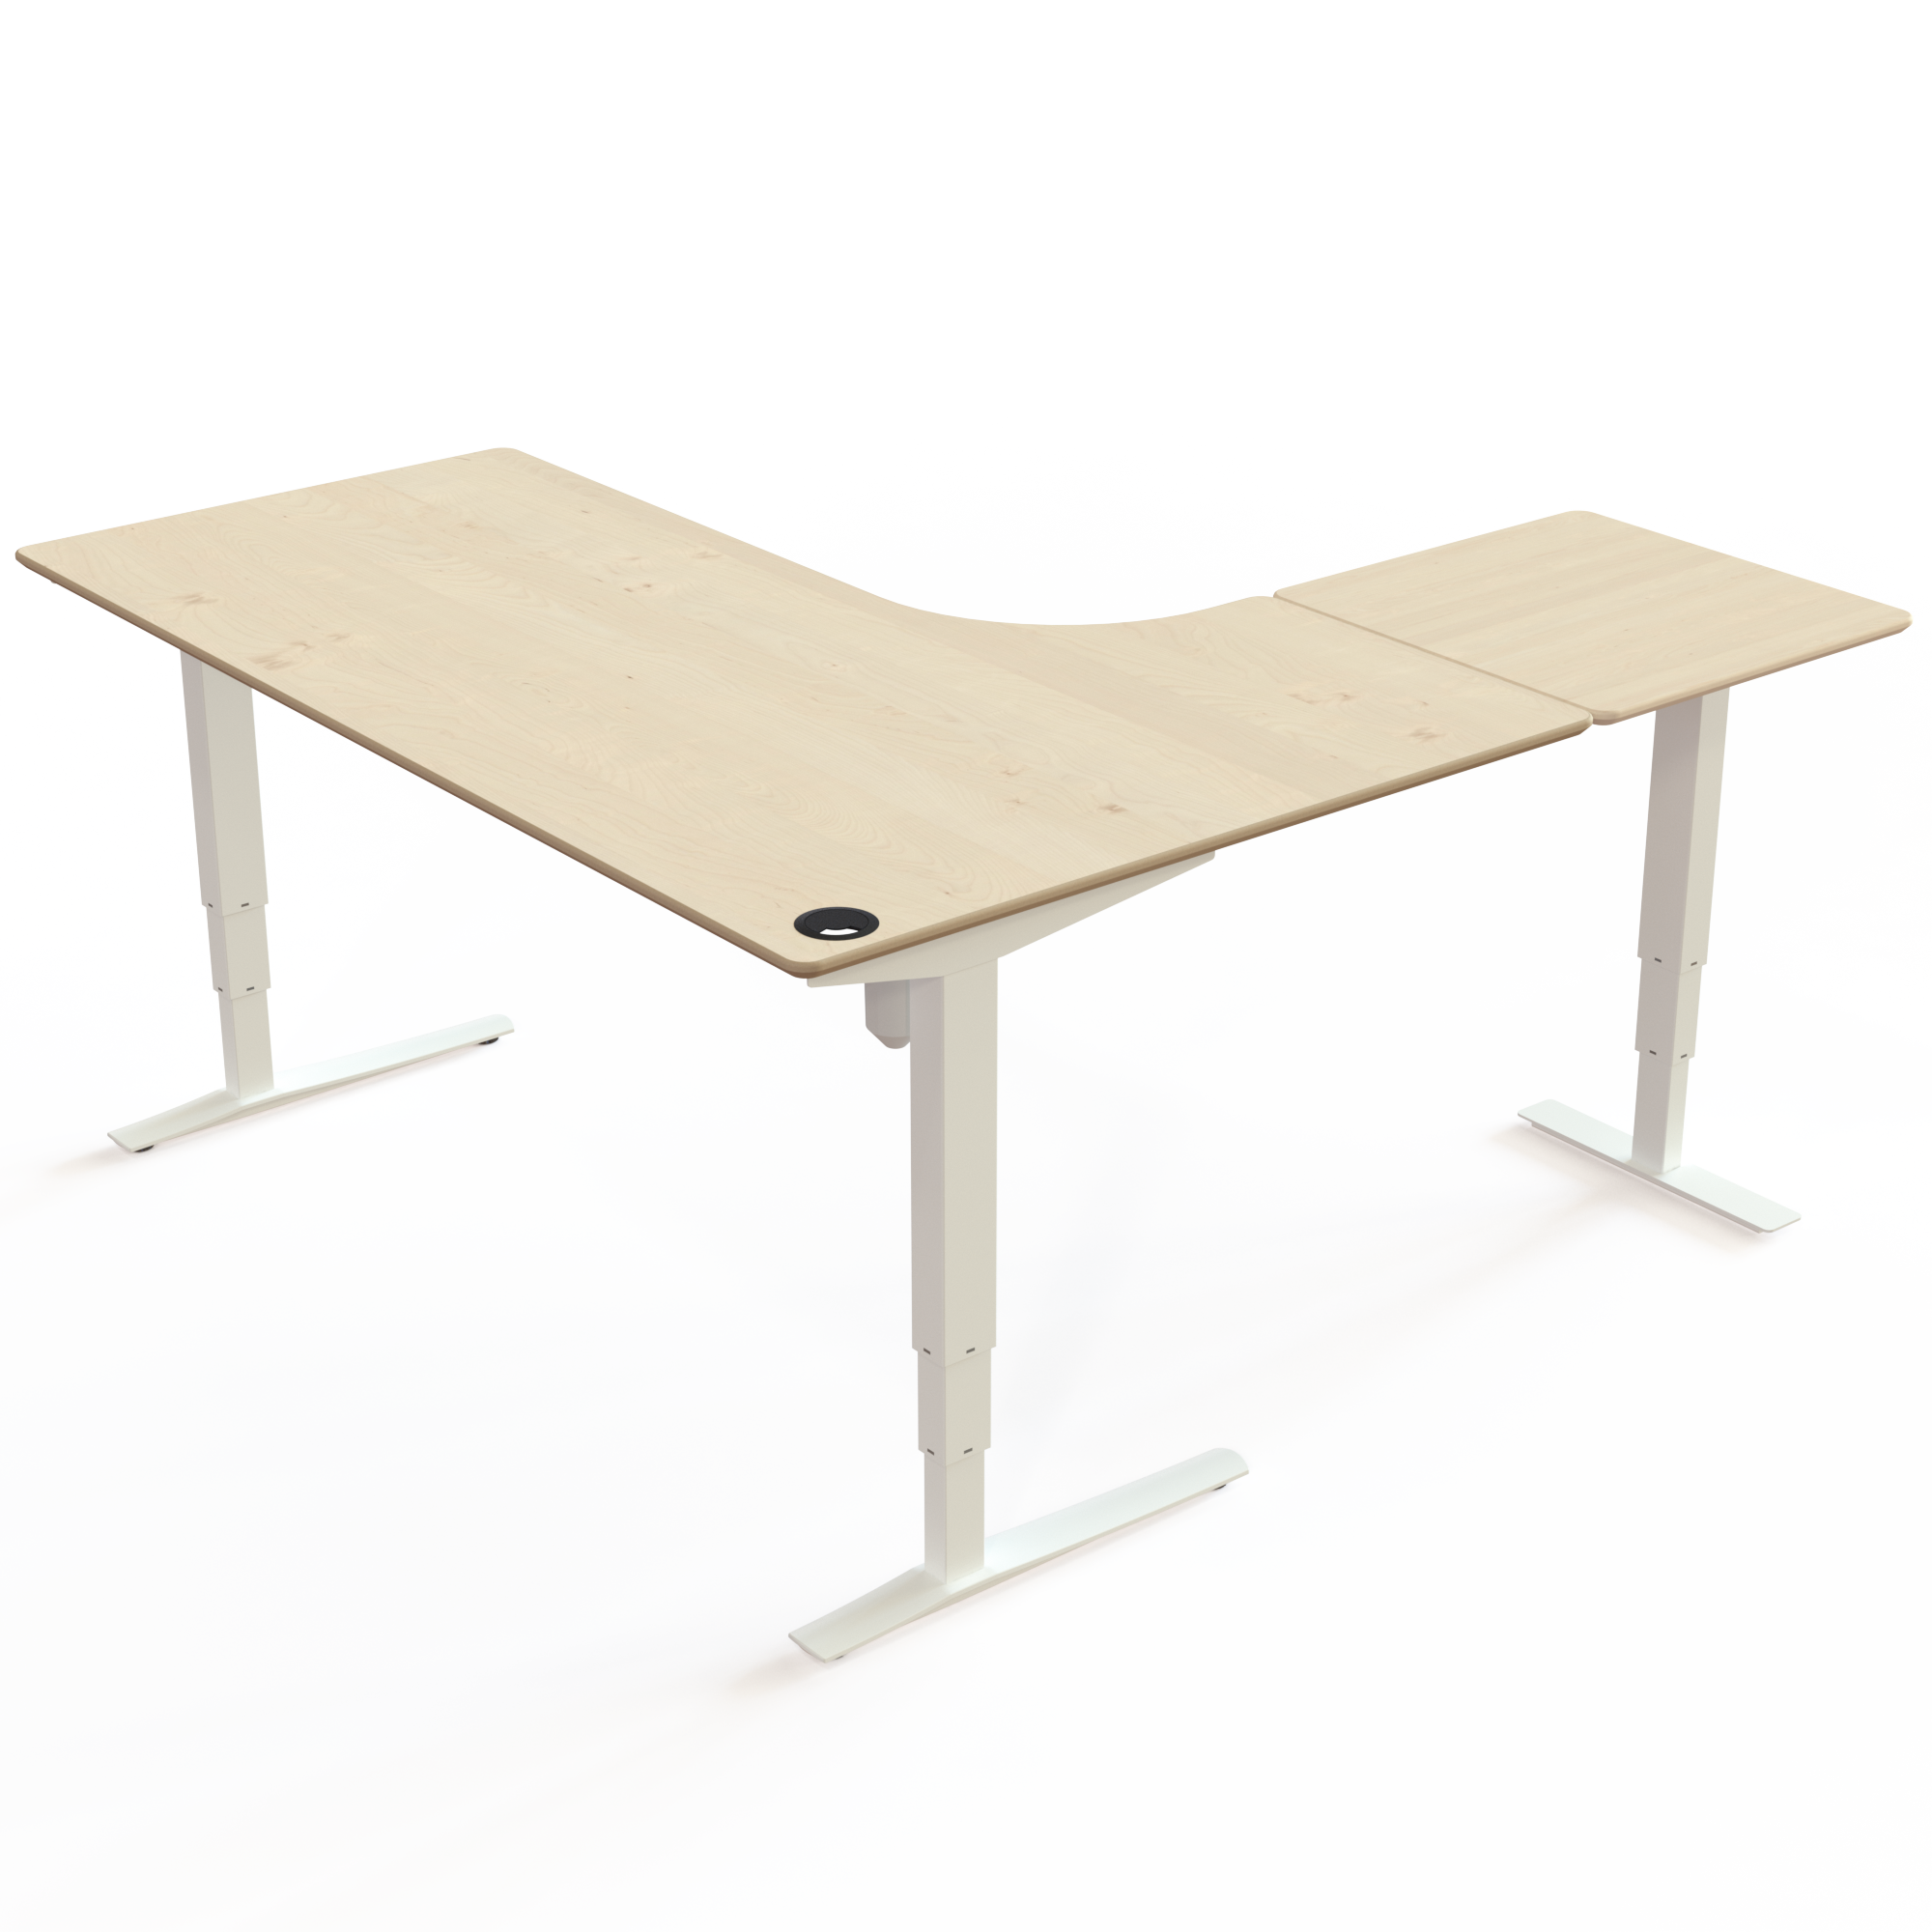 Electric Adjustable Desk | 180x180 cm | Maple with white frame